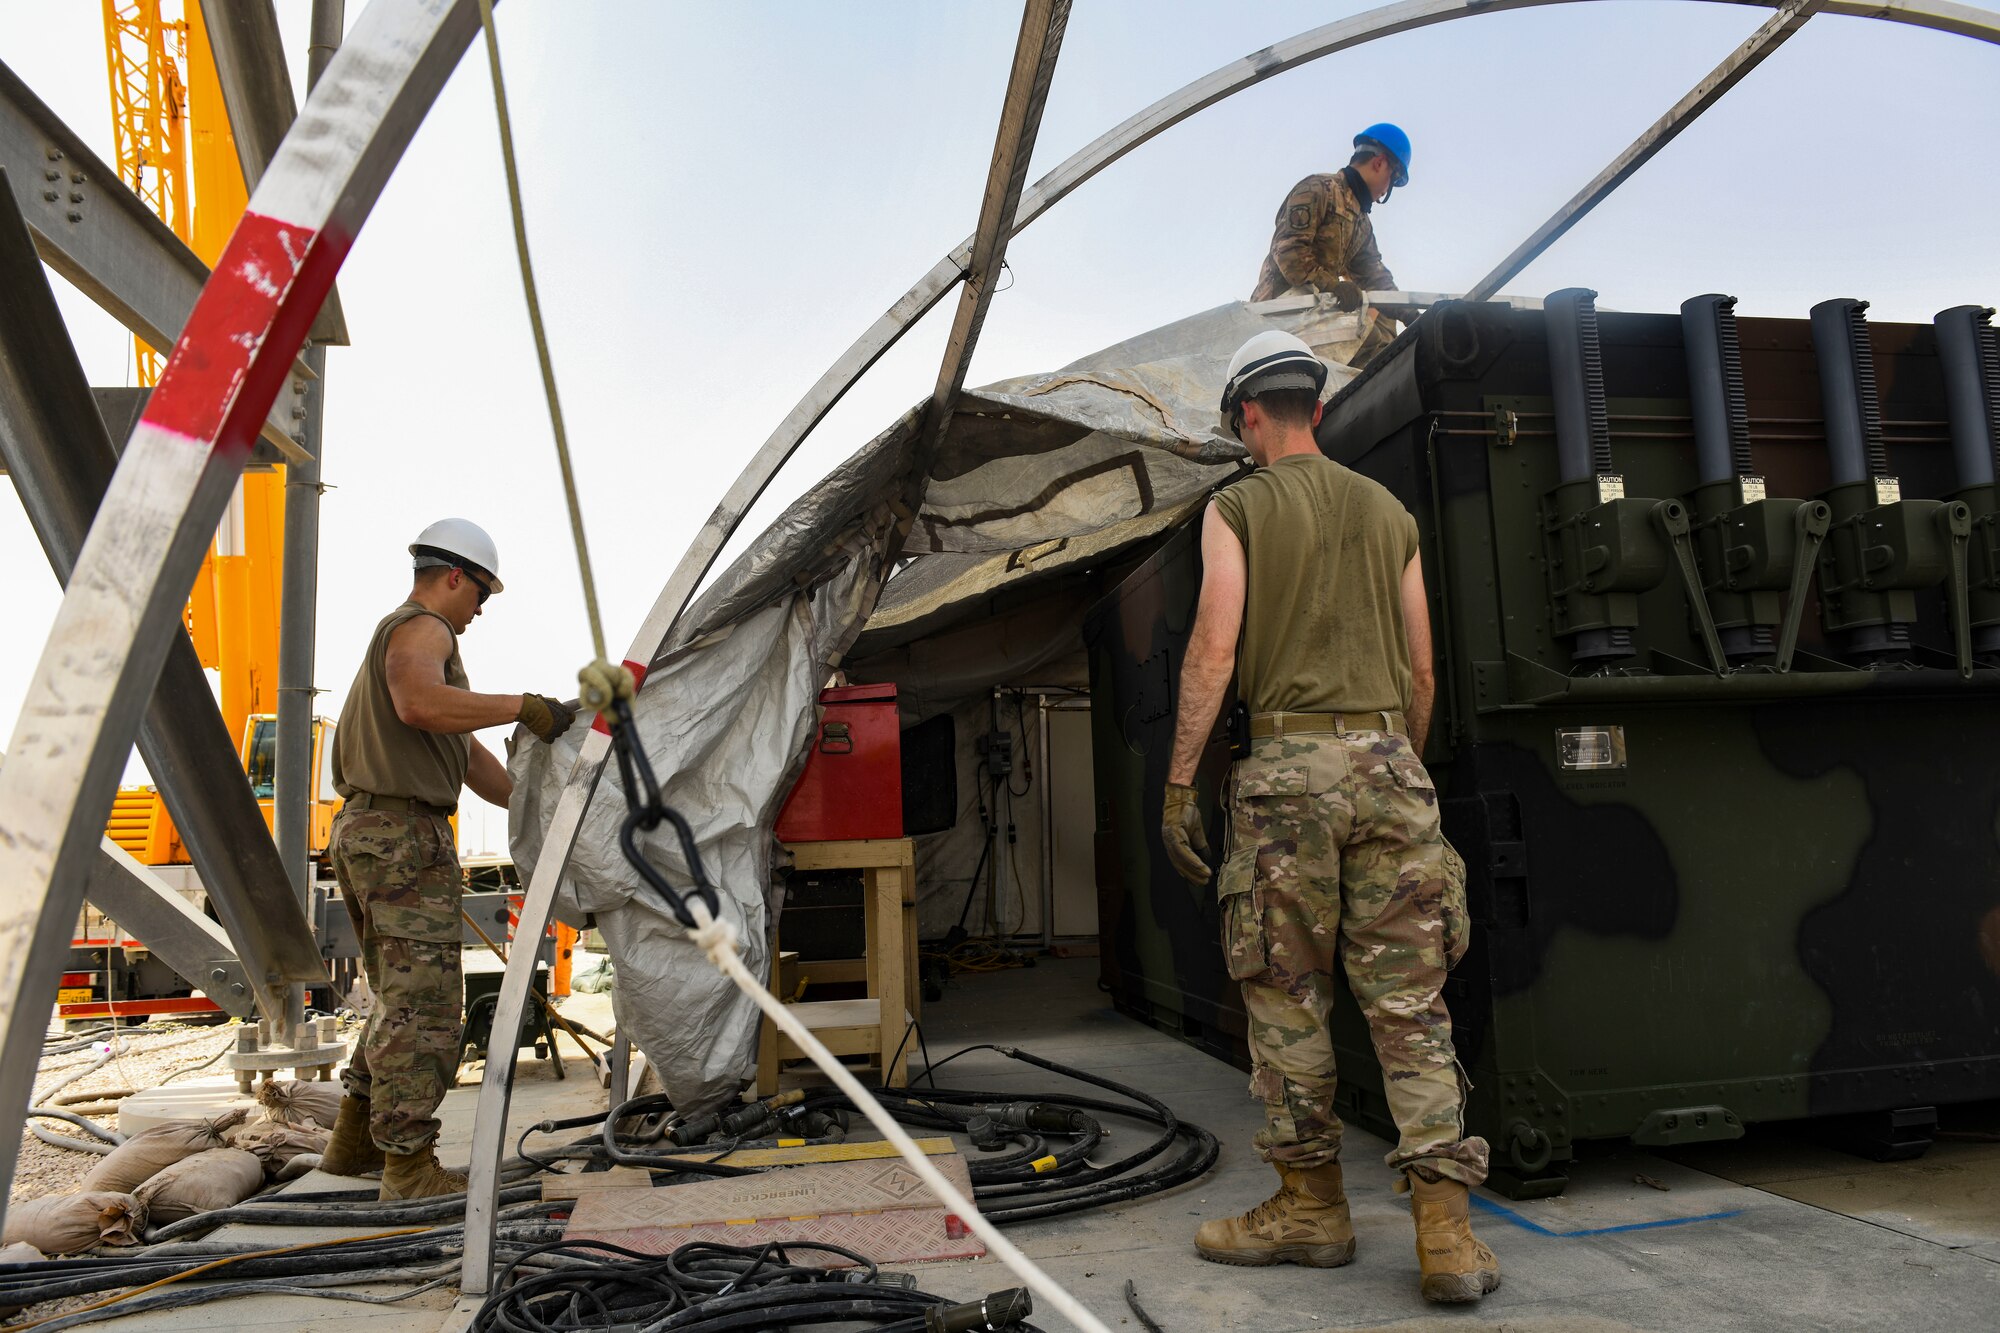 U.S. Air Force Senior Airman Anthony Niederschmidt, Airman 1st Class James Ballard, and Master Sgt. Jones Kwan, 727th Expeditionary Air Control Squadron, Detachment 3, radar technicians and superintendent, respectively, drag a protective covering into place over a shelter for a newly-replaced AN/TPS-75 radar system as part of regular maintenance July 27, 2021, at Al Udeid Air Base, Qatar. The radar provides a common surveillance and combat identification picture to support battle management command and control for the combined defense of the Arabian Peninsula. (U.S. Air Force by Staff Sgt. Alexandria Lee)